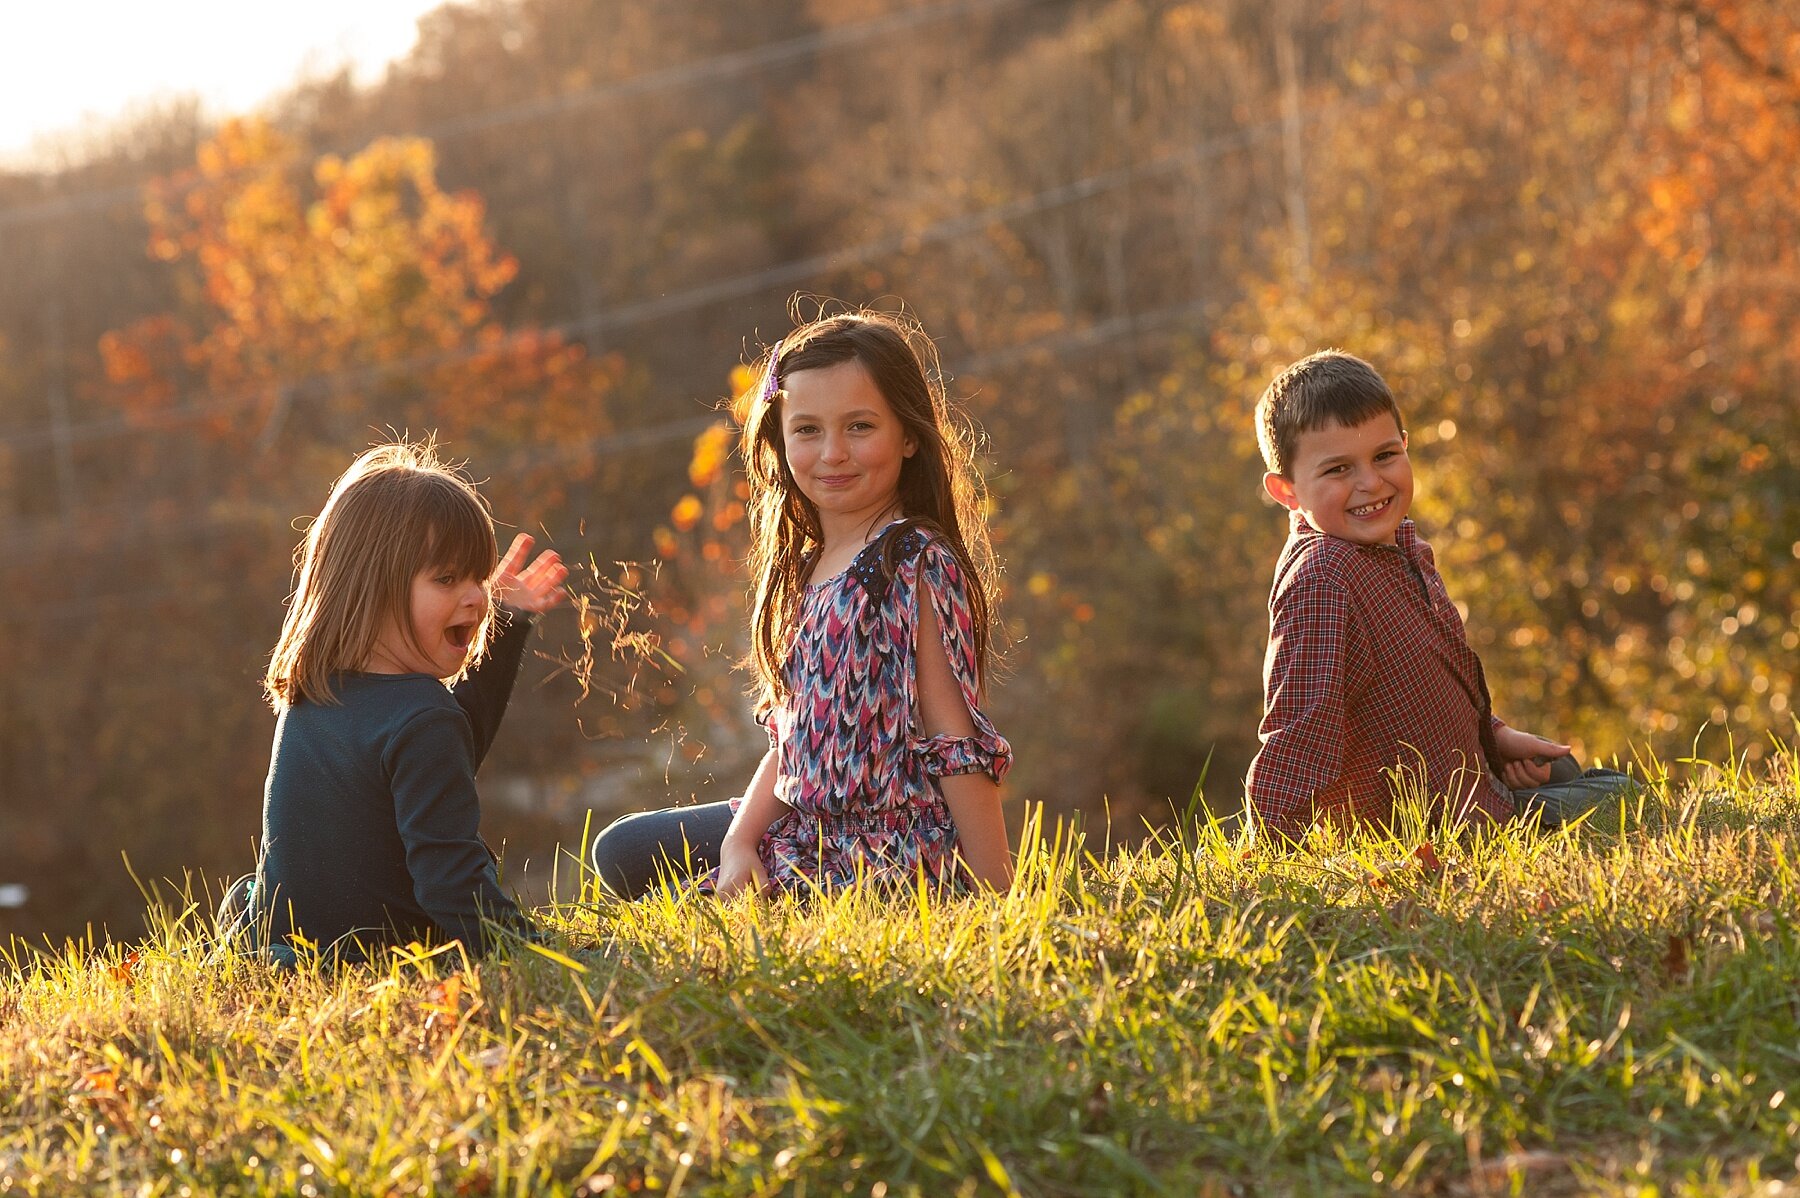 Wendy Zook Photography | Frederick Maryland family photographer, Frederick Family photographer, Maryland family photographer, MD family photographer, Frederick family photos, fall family photos in Frederick MD